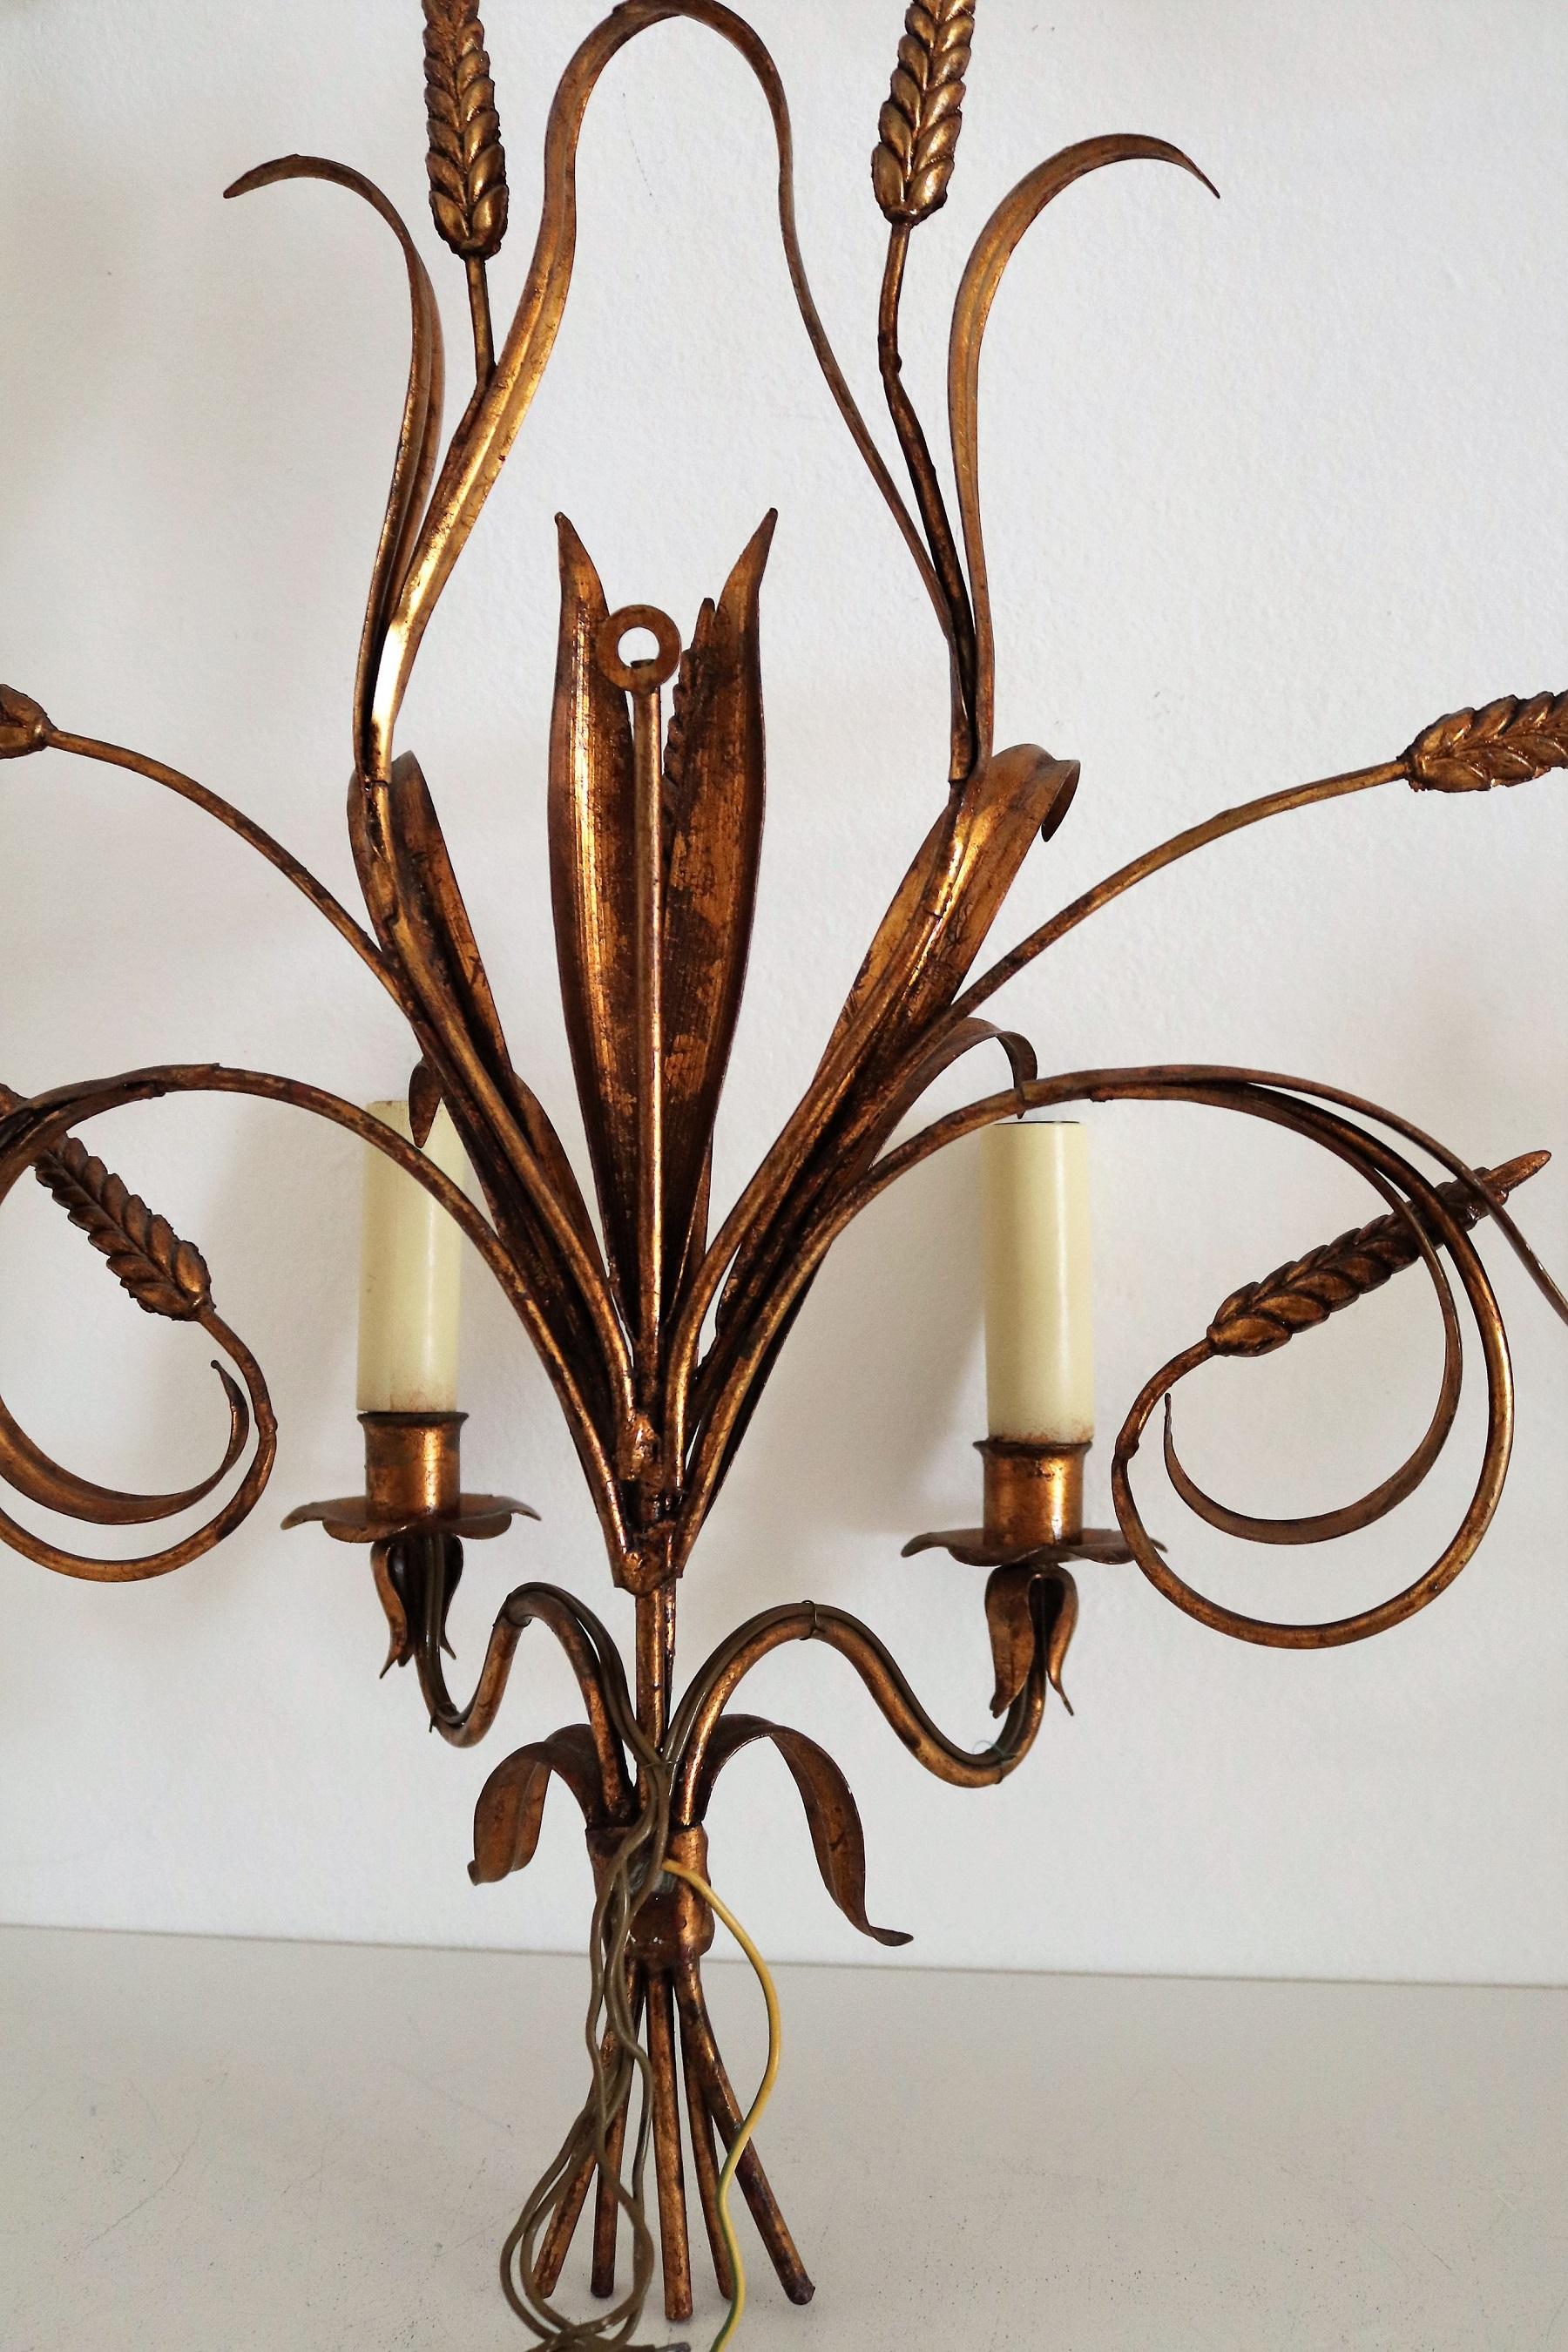 Italian Midcentury Gilt Tole Wall Sconces with Wheat Sheaf, 1950s, Set of Five For Sale 9